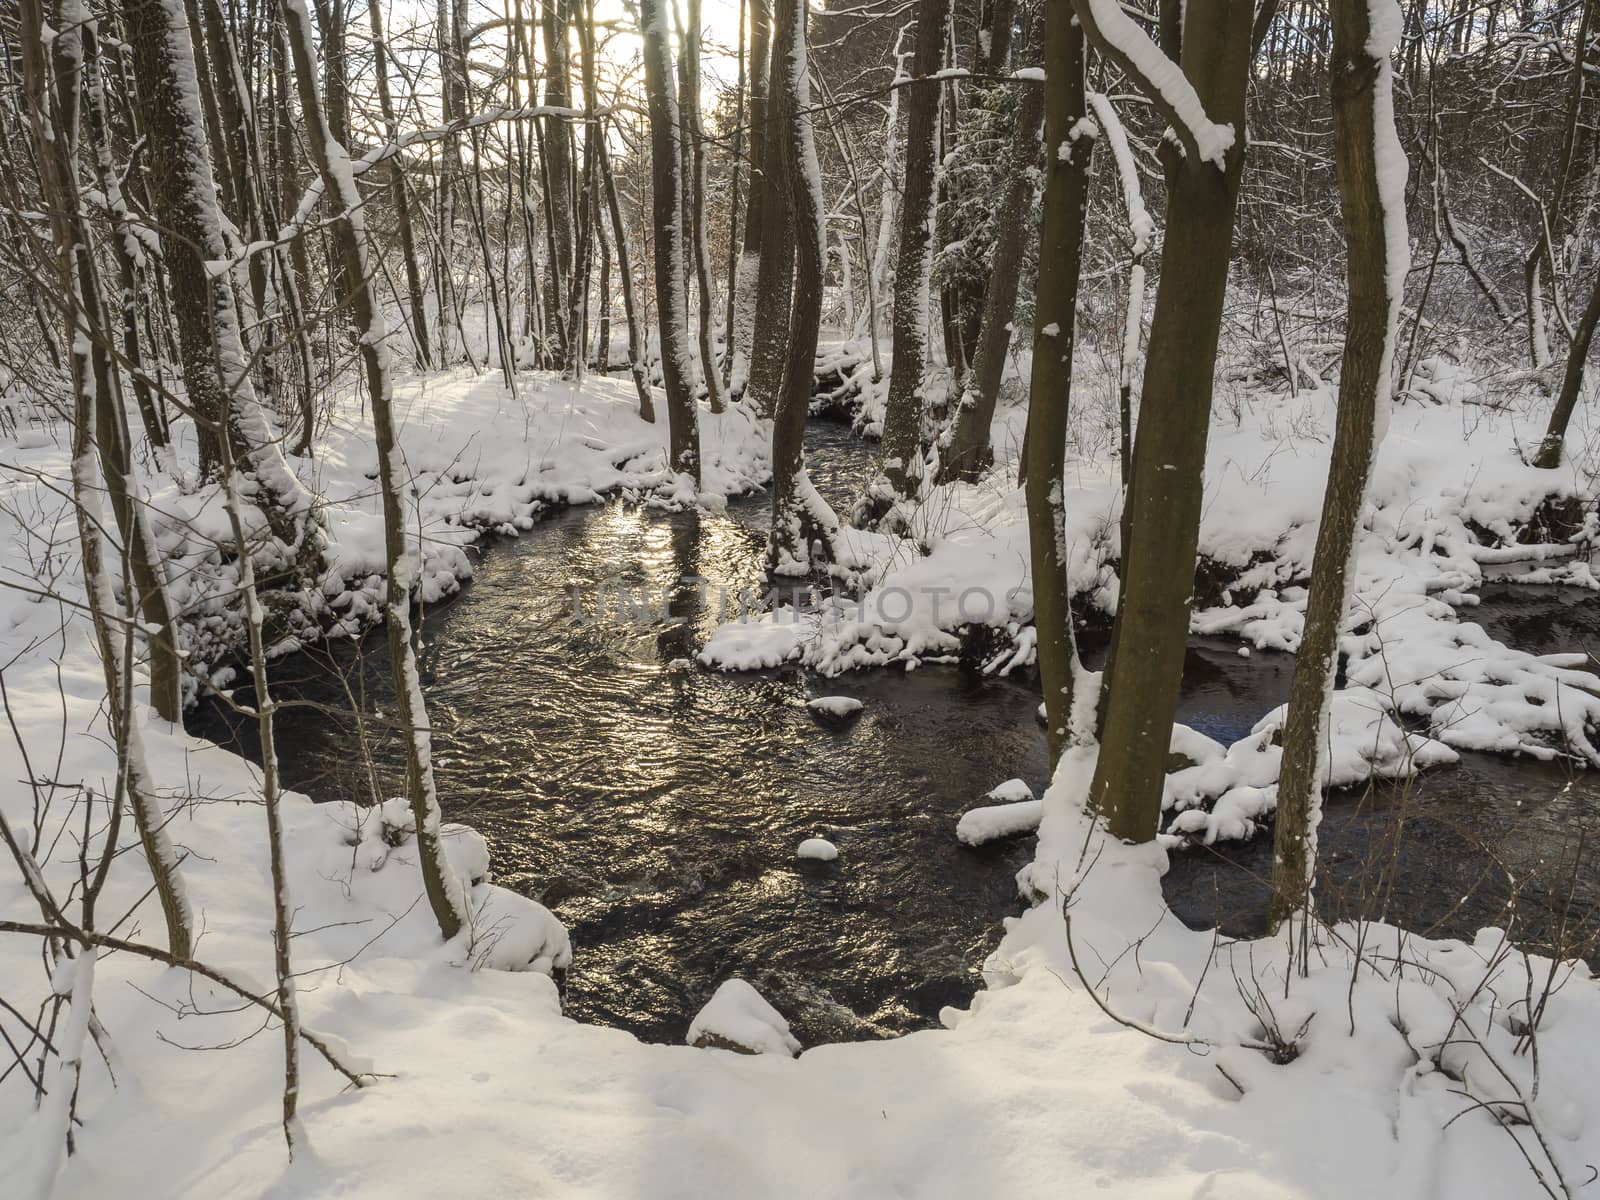 snow covered forest water stream creek with trees, branches and stones, idyllic winter landscape in golden hour sun light.